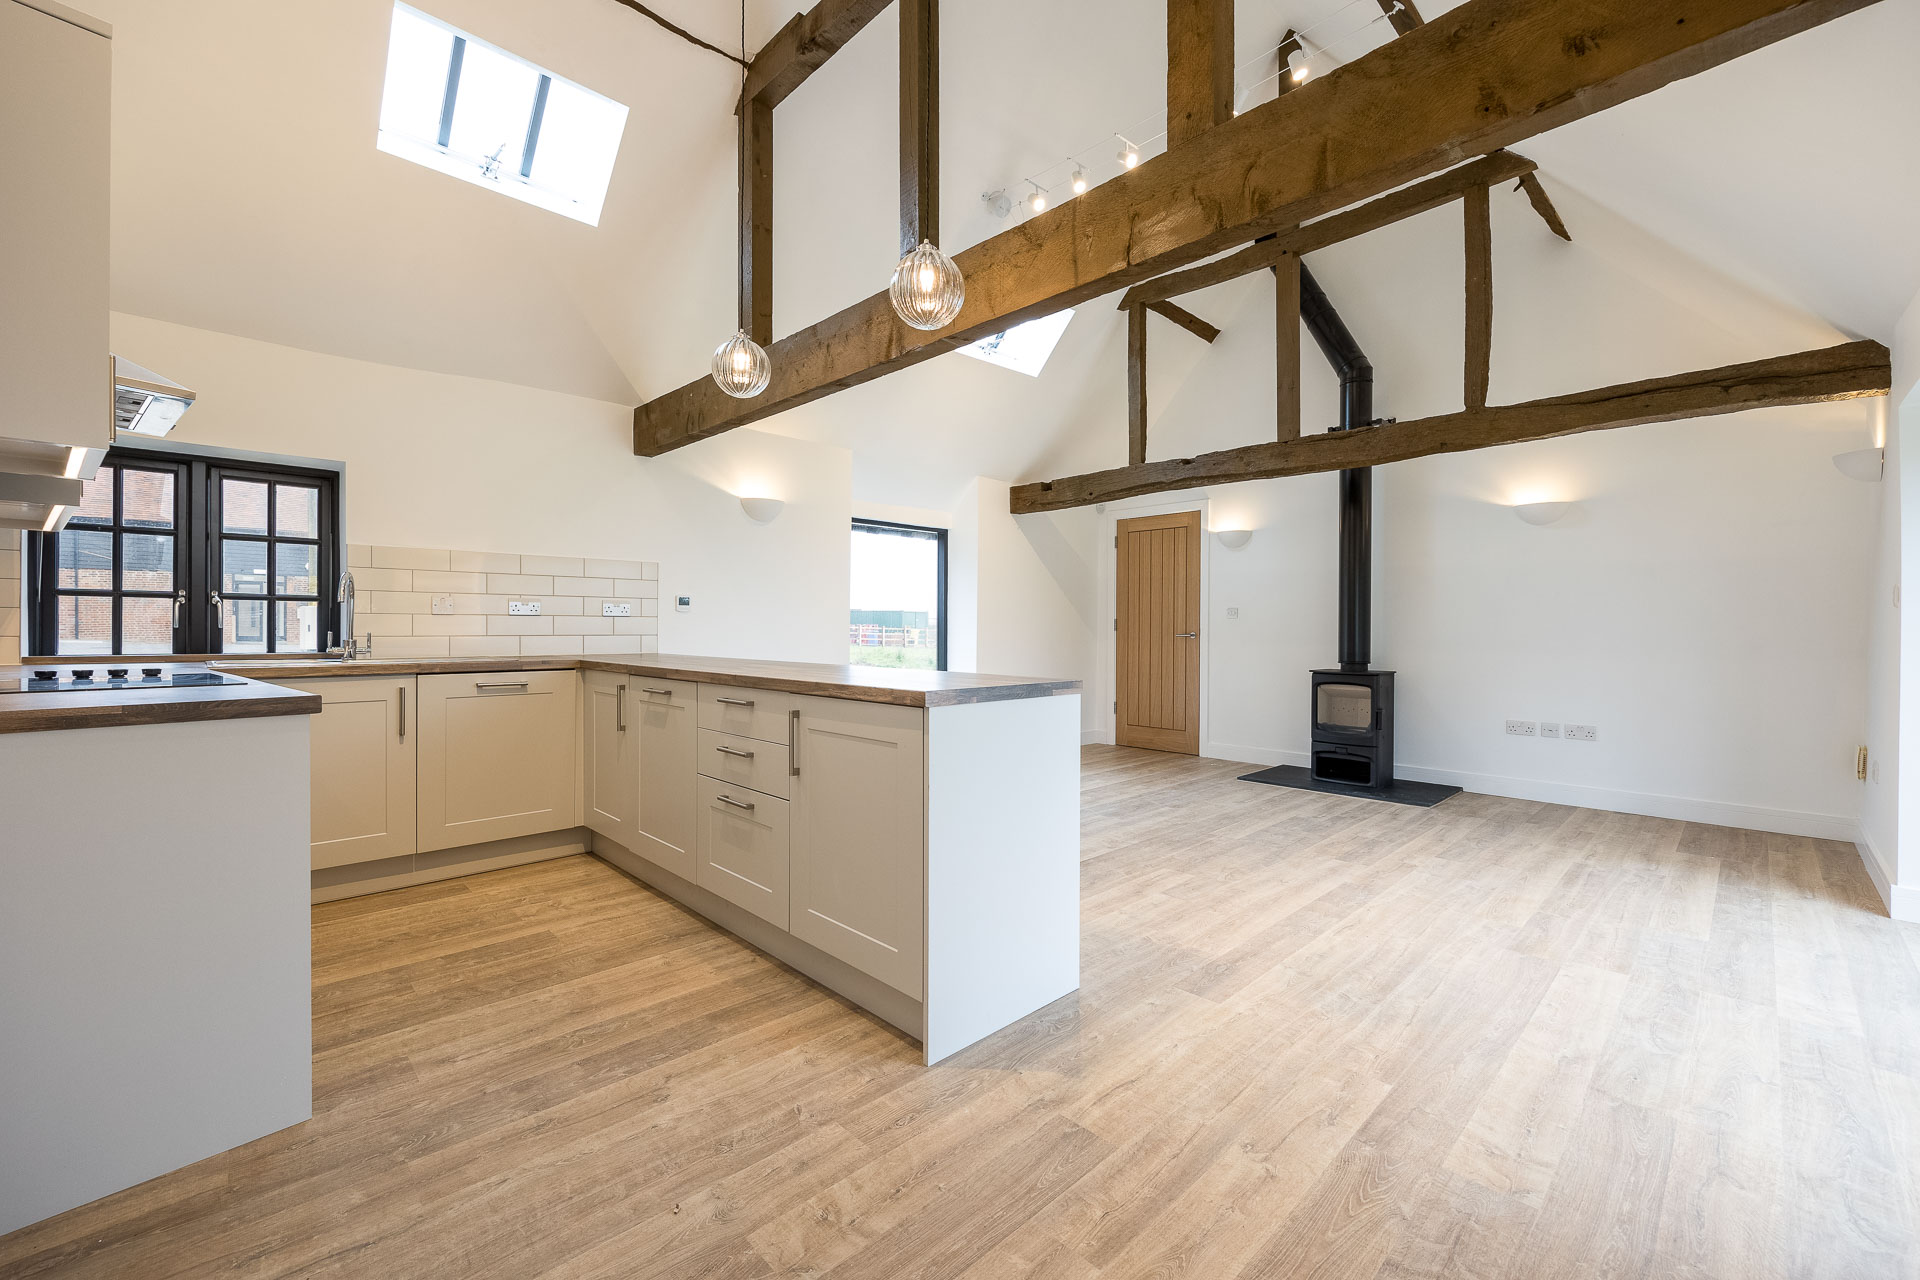 An internal view of a cosy rustic kitchen with wooden beams and flooring at Hard to Find Farm